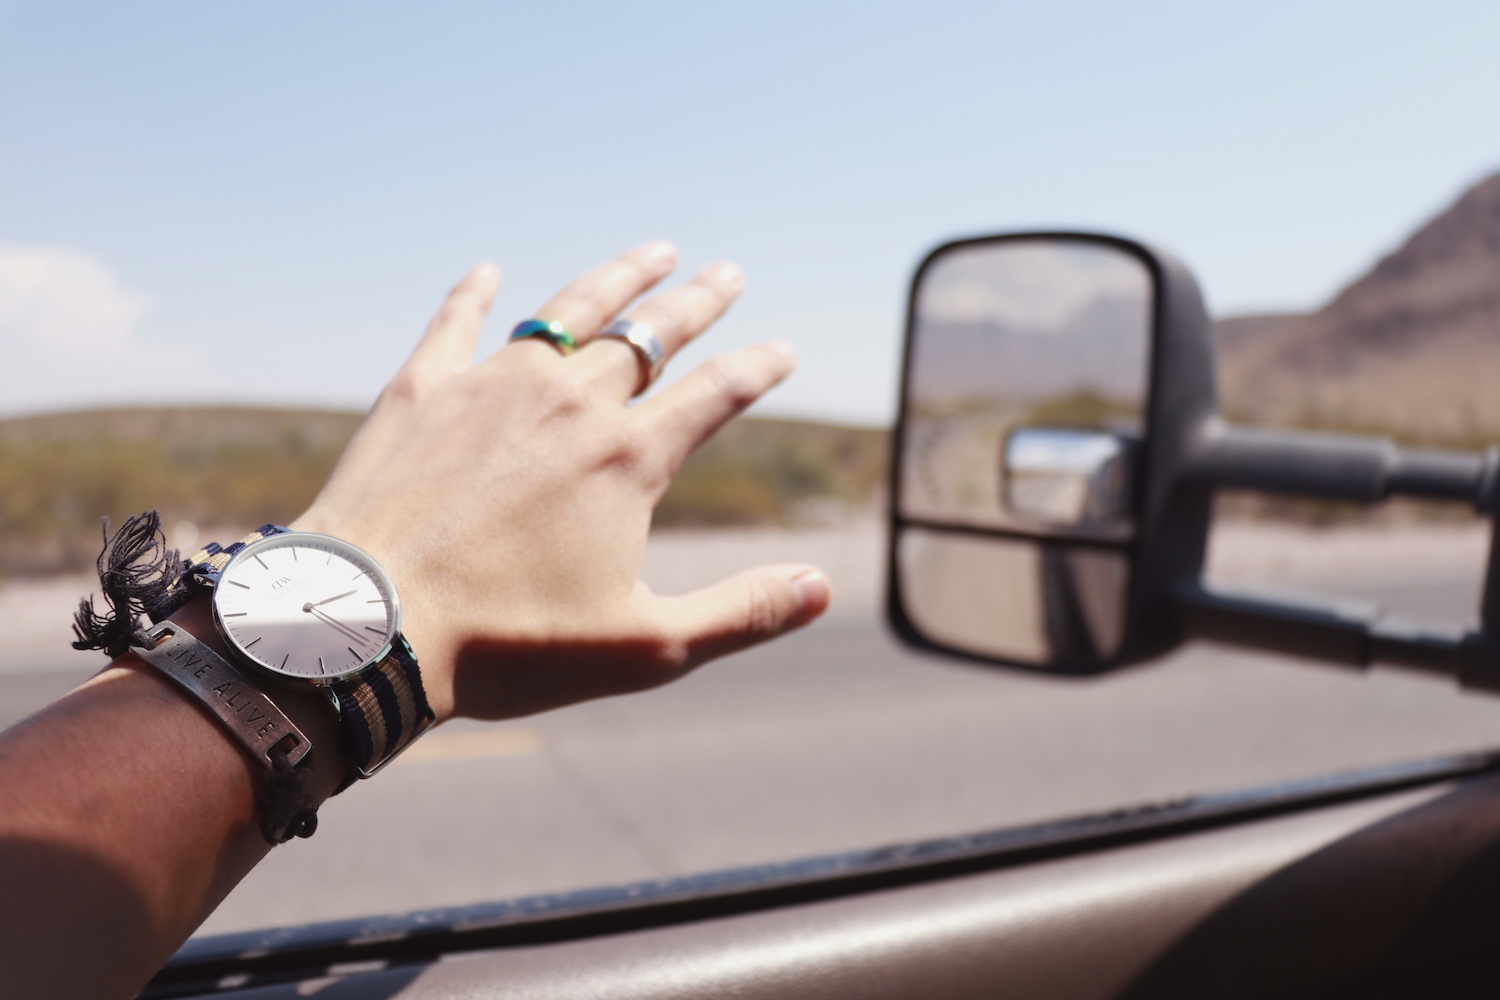 Light-skinned hand with watch and bracelets sticking out of a truck window driving on a sunny day